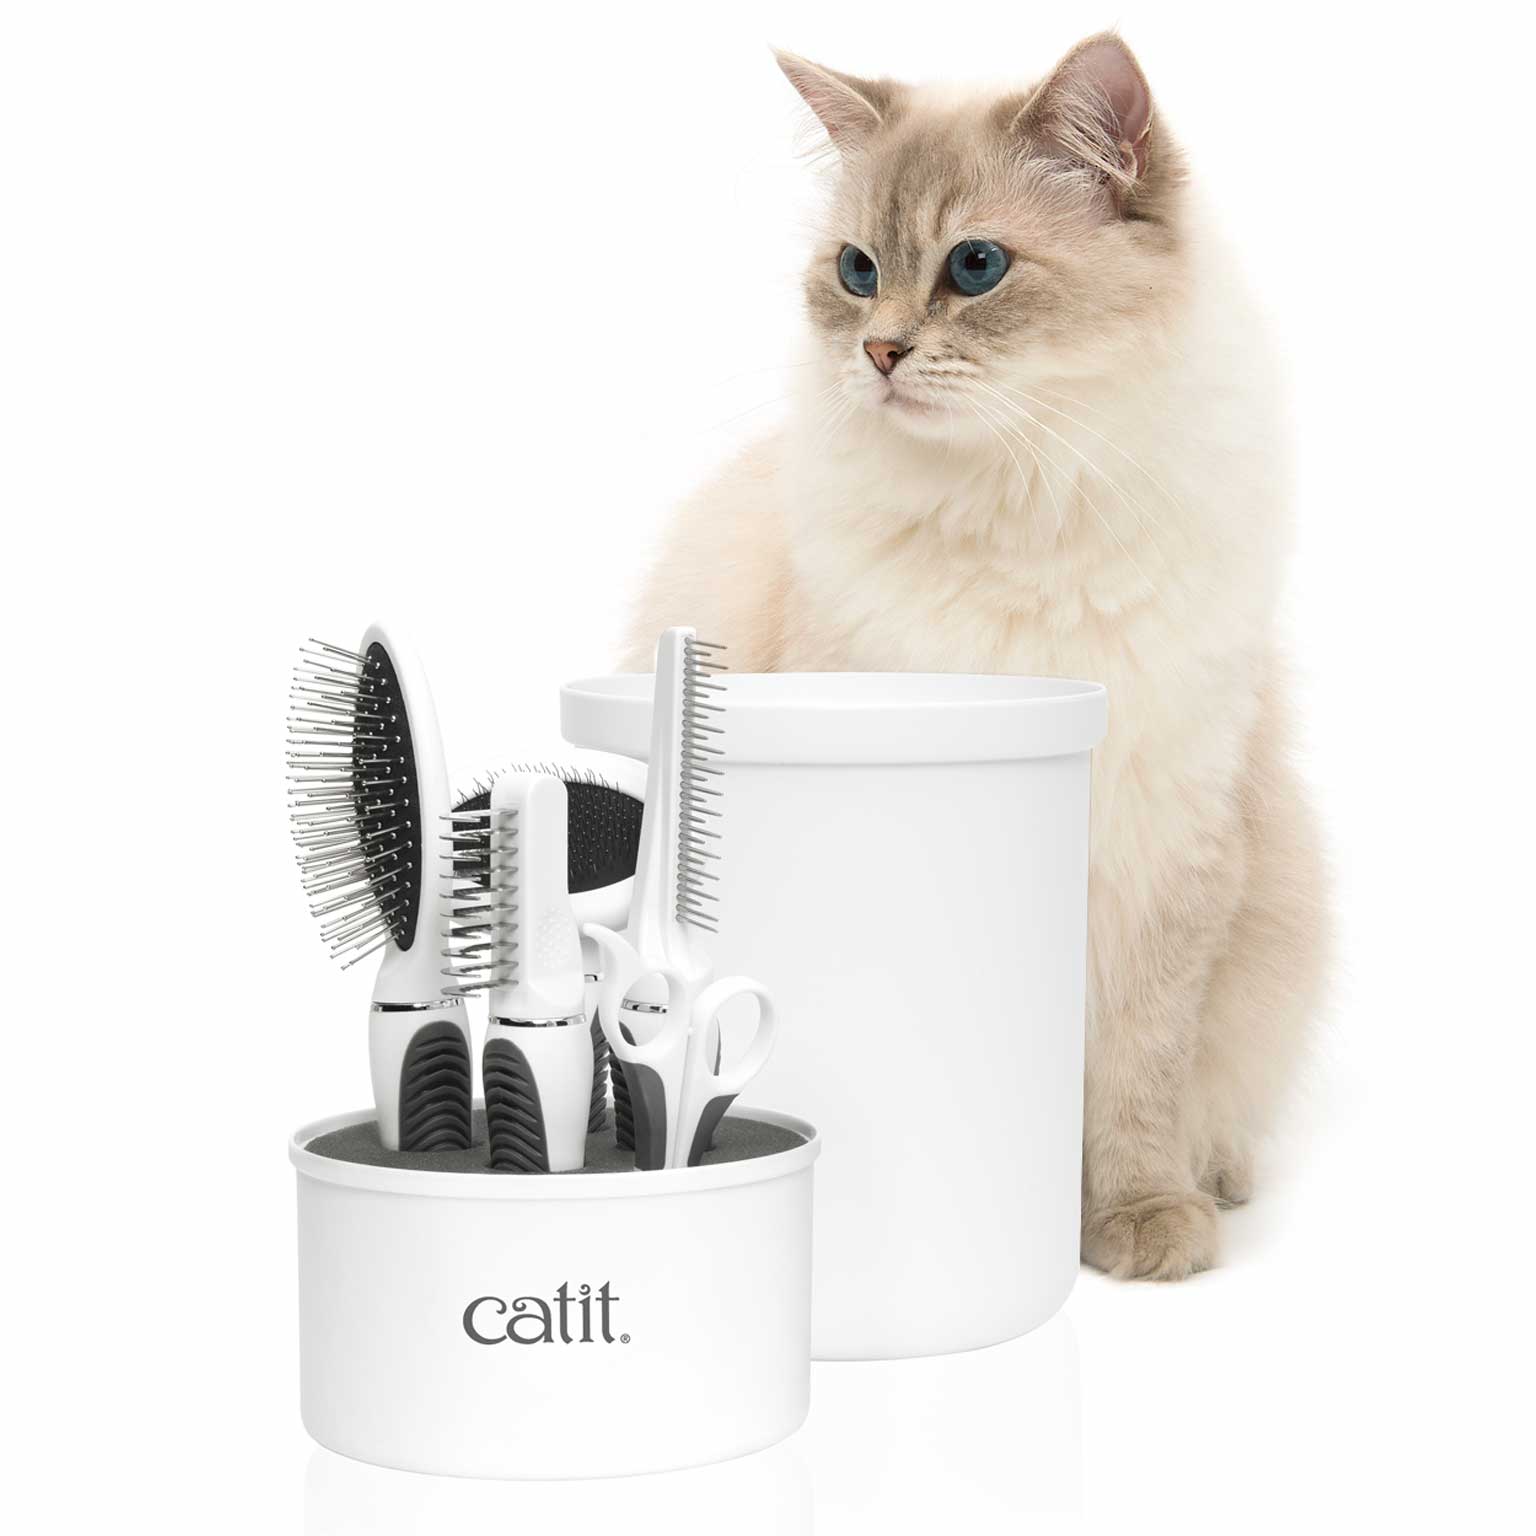 Grooming supplies for longhaired cats